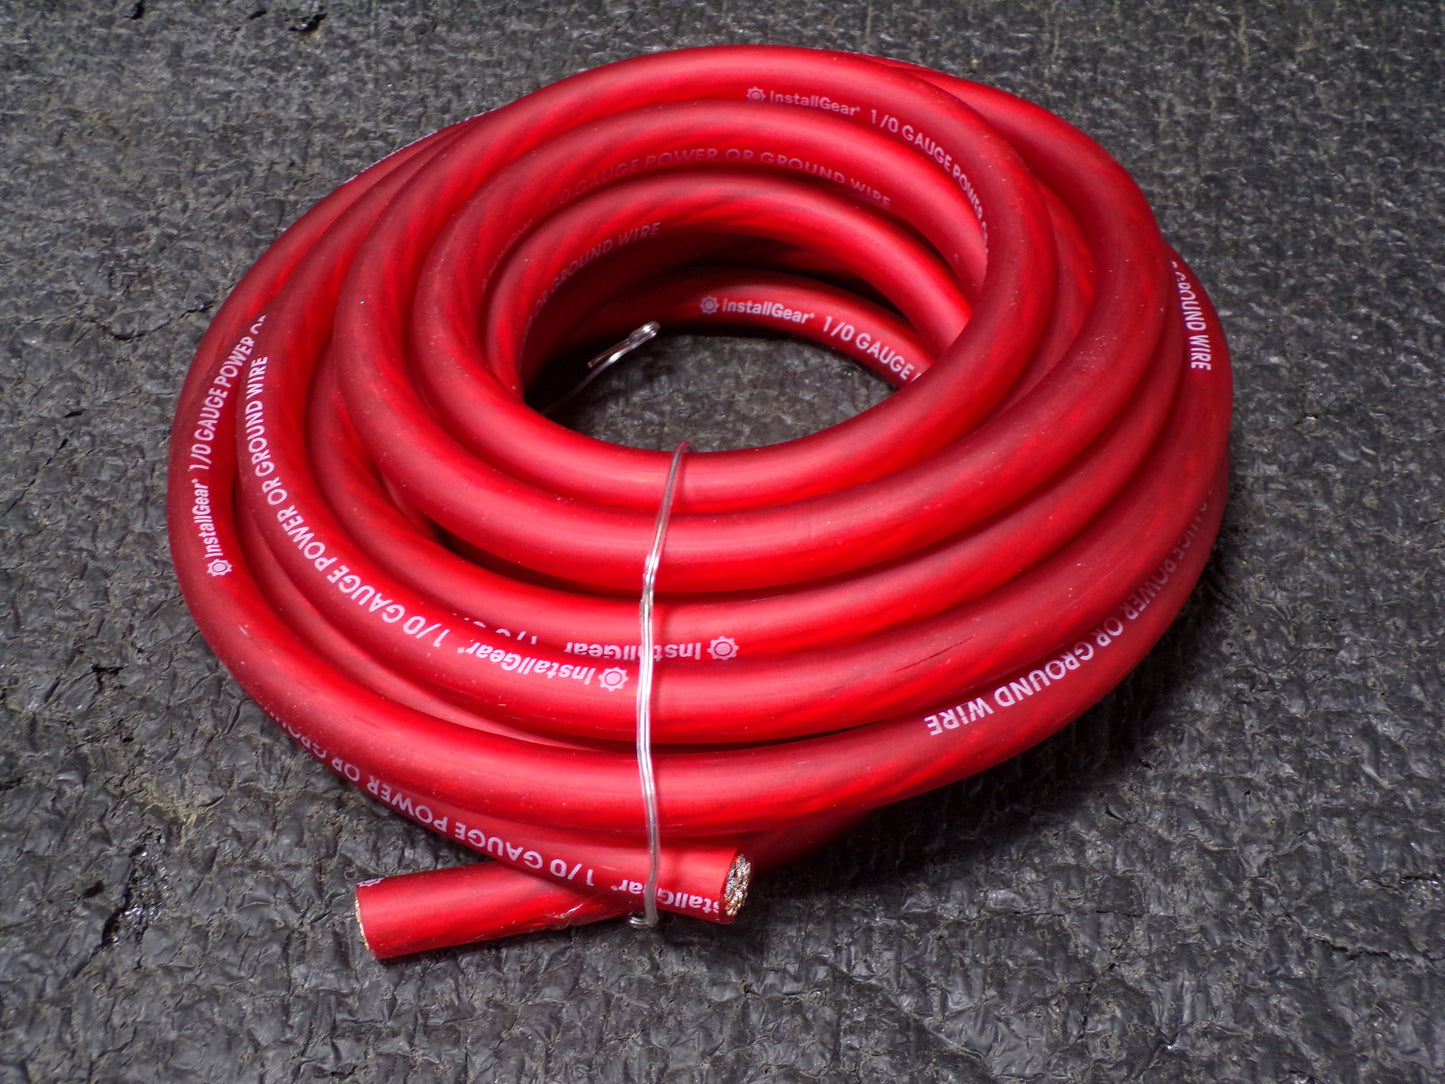 InstallGear 1/0 Gauge Ga Awg Red 25ft Power/Ground Cable (CR00388-WT12)